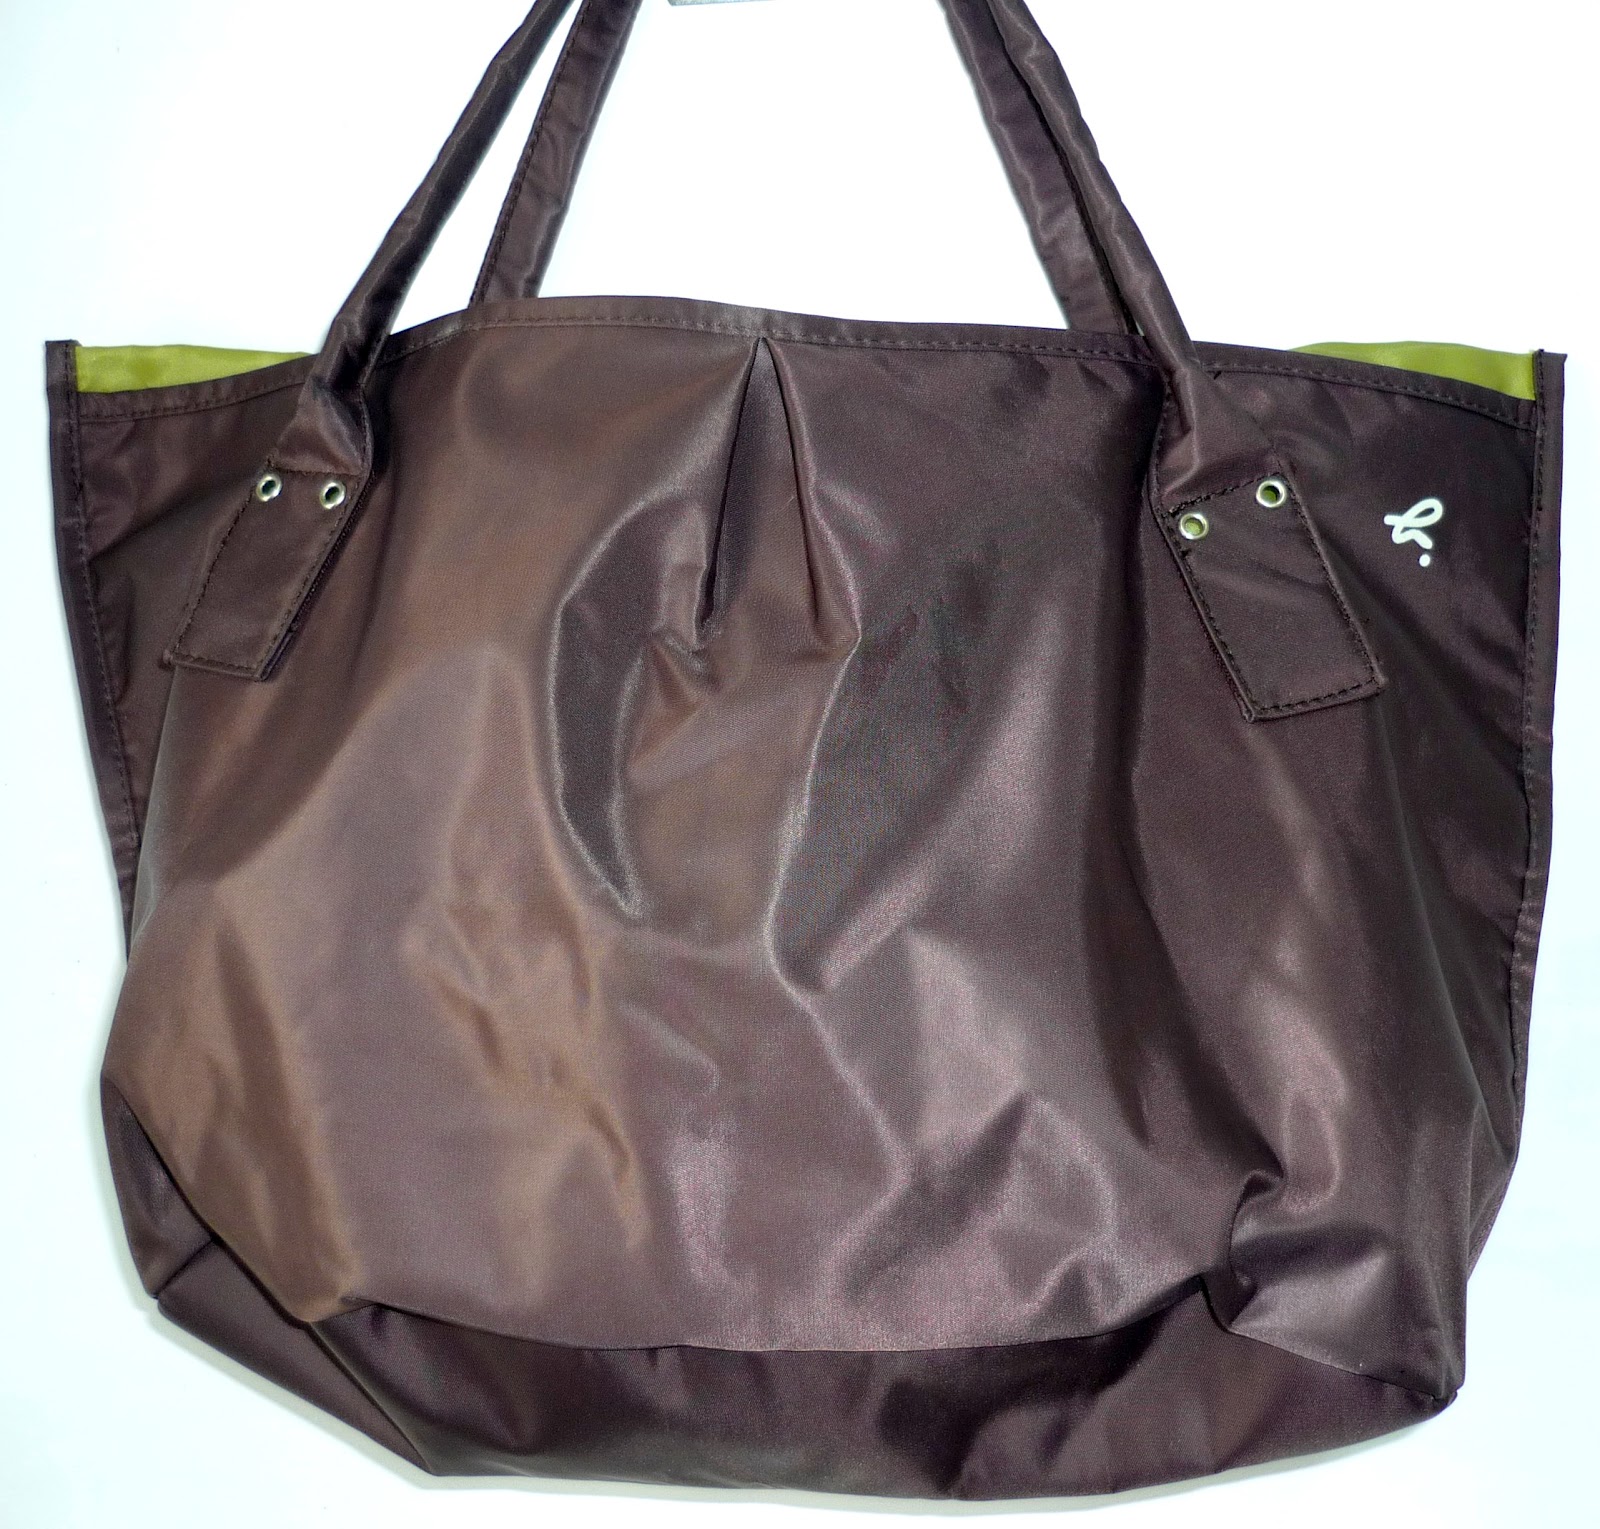 @RCHYbundle: Agnes B voyage tote carry bags...SOLD